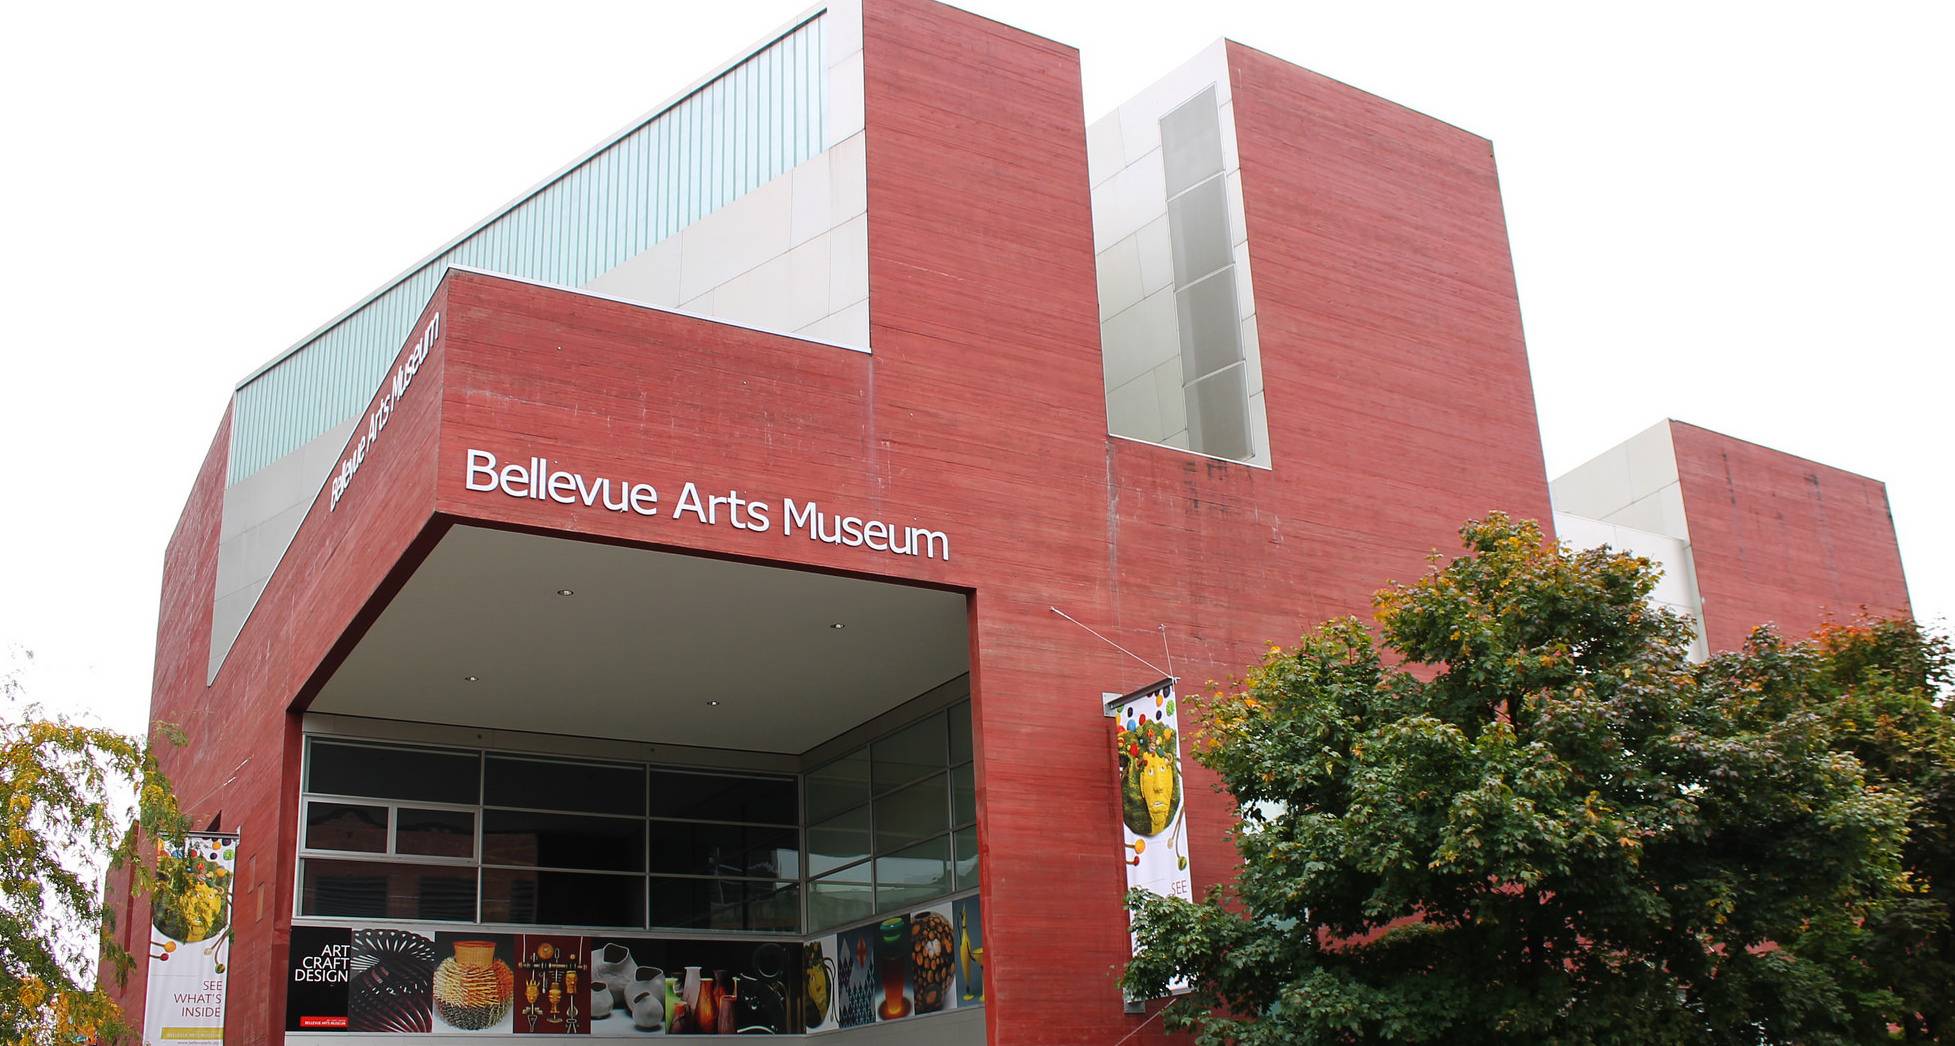 A Beginner’s Guide to Exploring the Arts in Bellevue